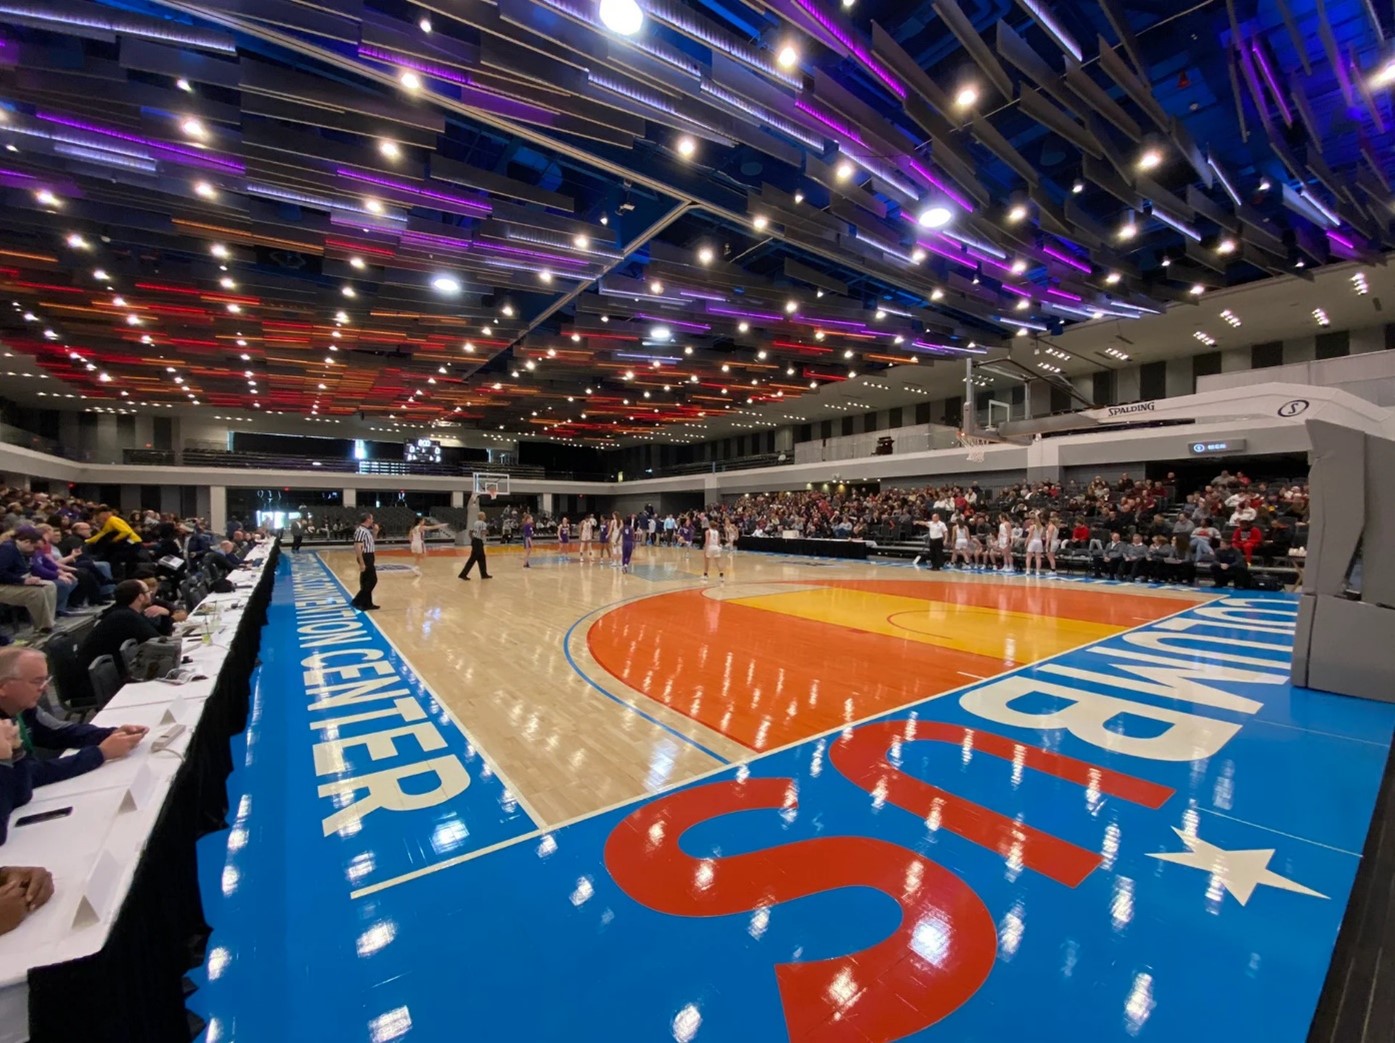 ASM Global will work with Playeasy to bring sports events and activities to its convention center portfolio